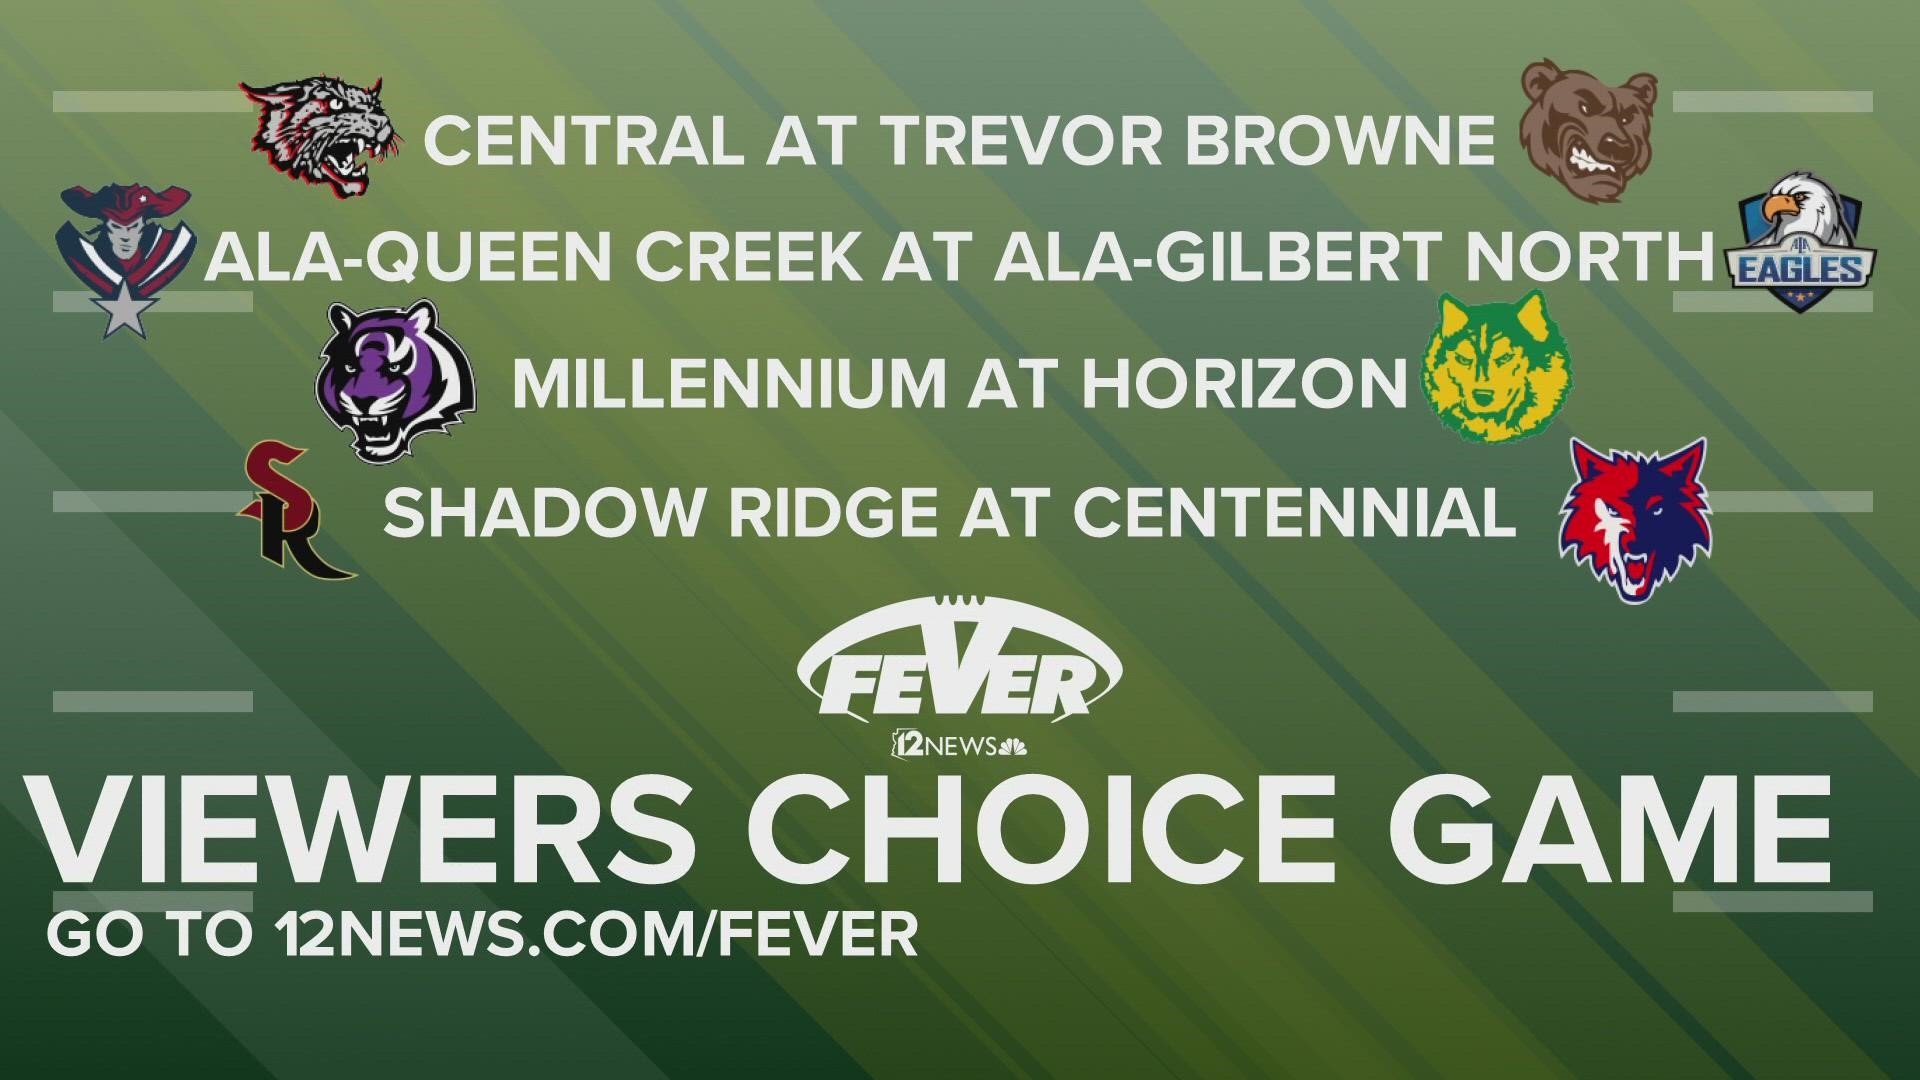 We need your help choosing if the Fever team should go to Central @ Browne, ALA-QC @ ALA-GN, Millennium @ Horizon or Shadow Ridge @ Centennial! Vote now!